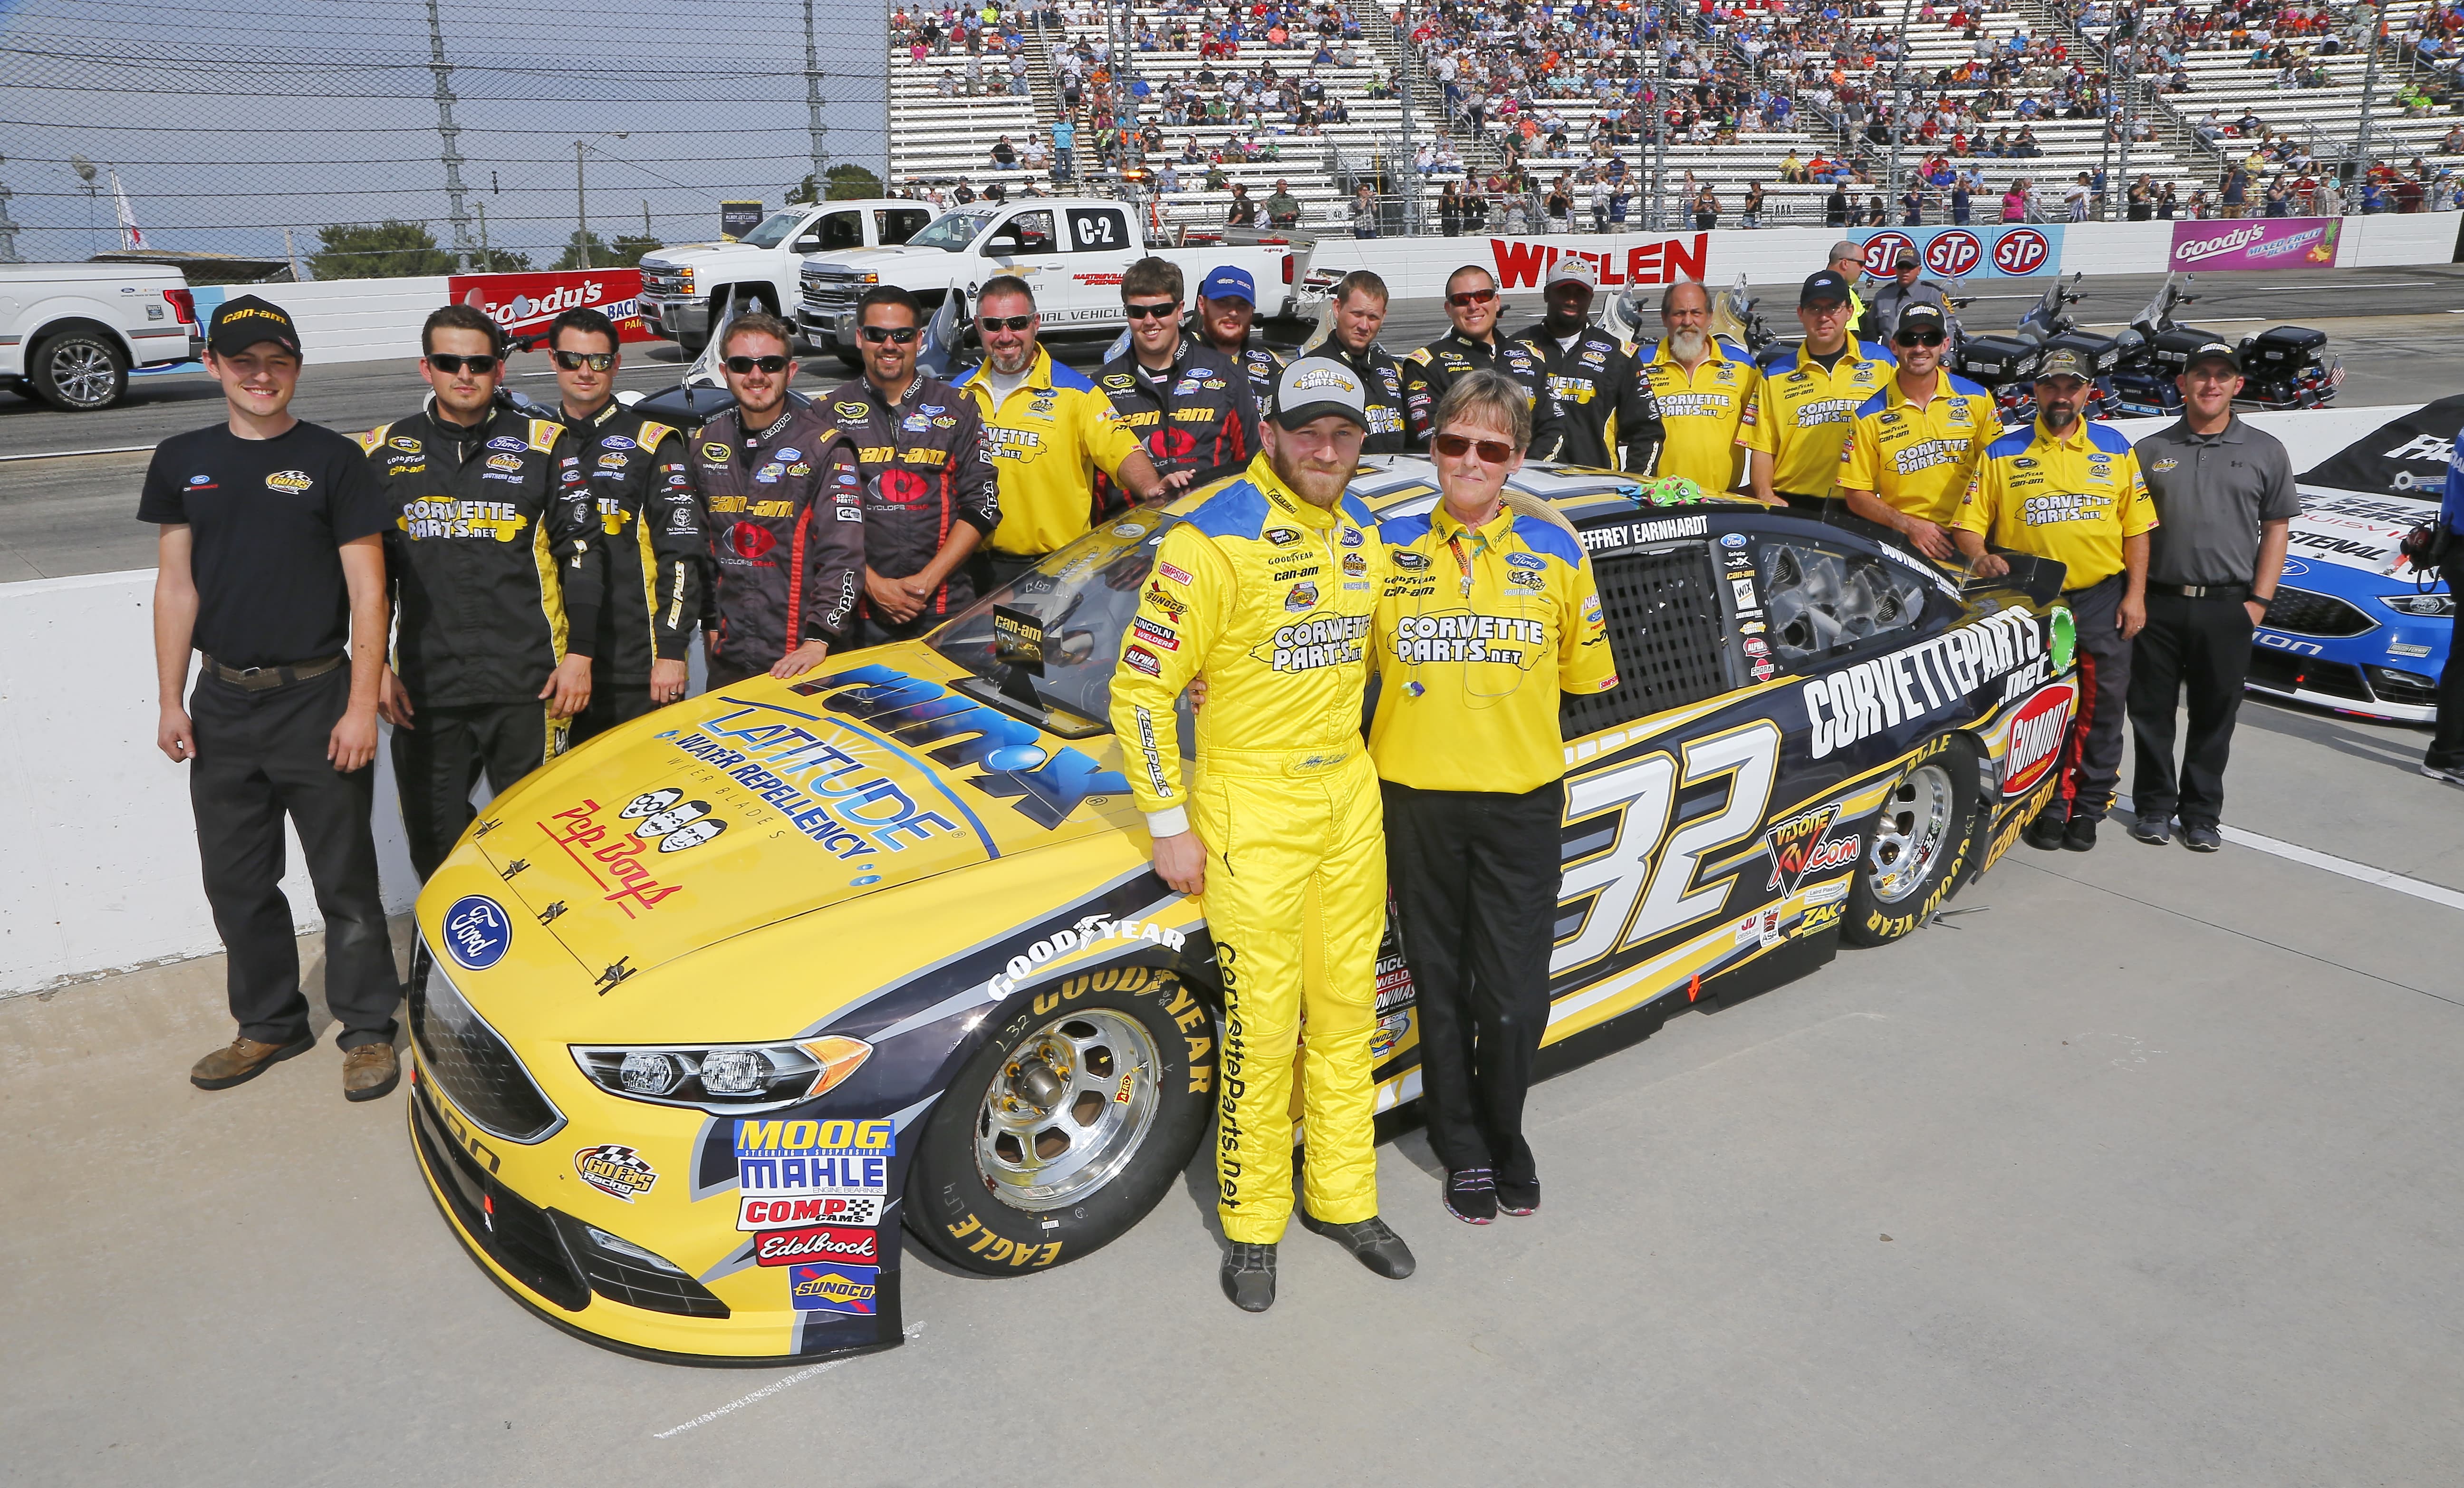 NASCAR: Oct 30 Goody's Fast Relief 500